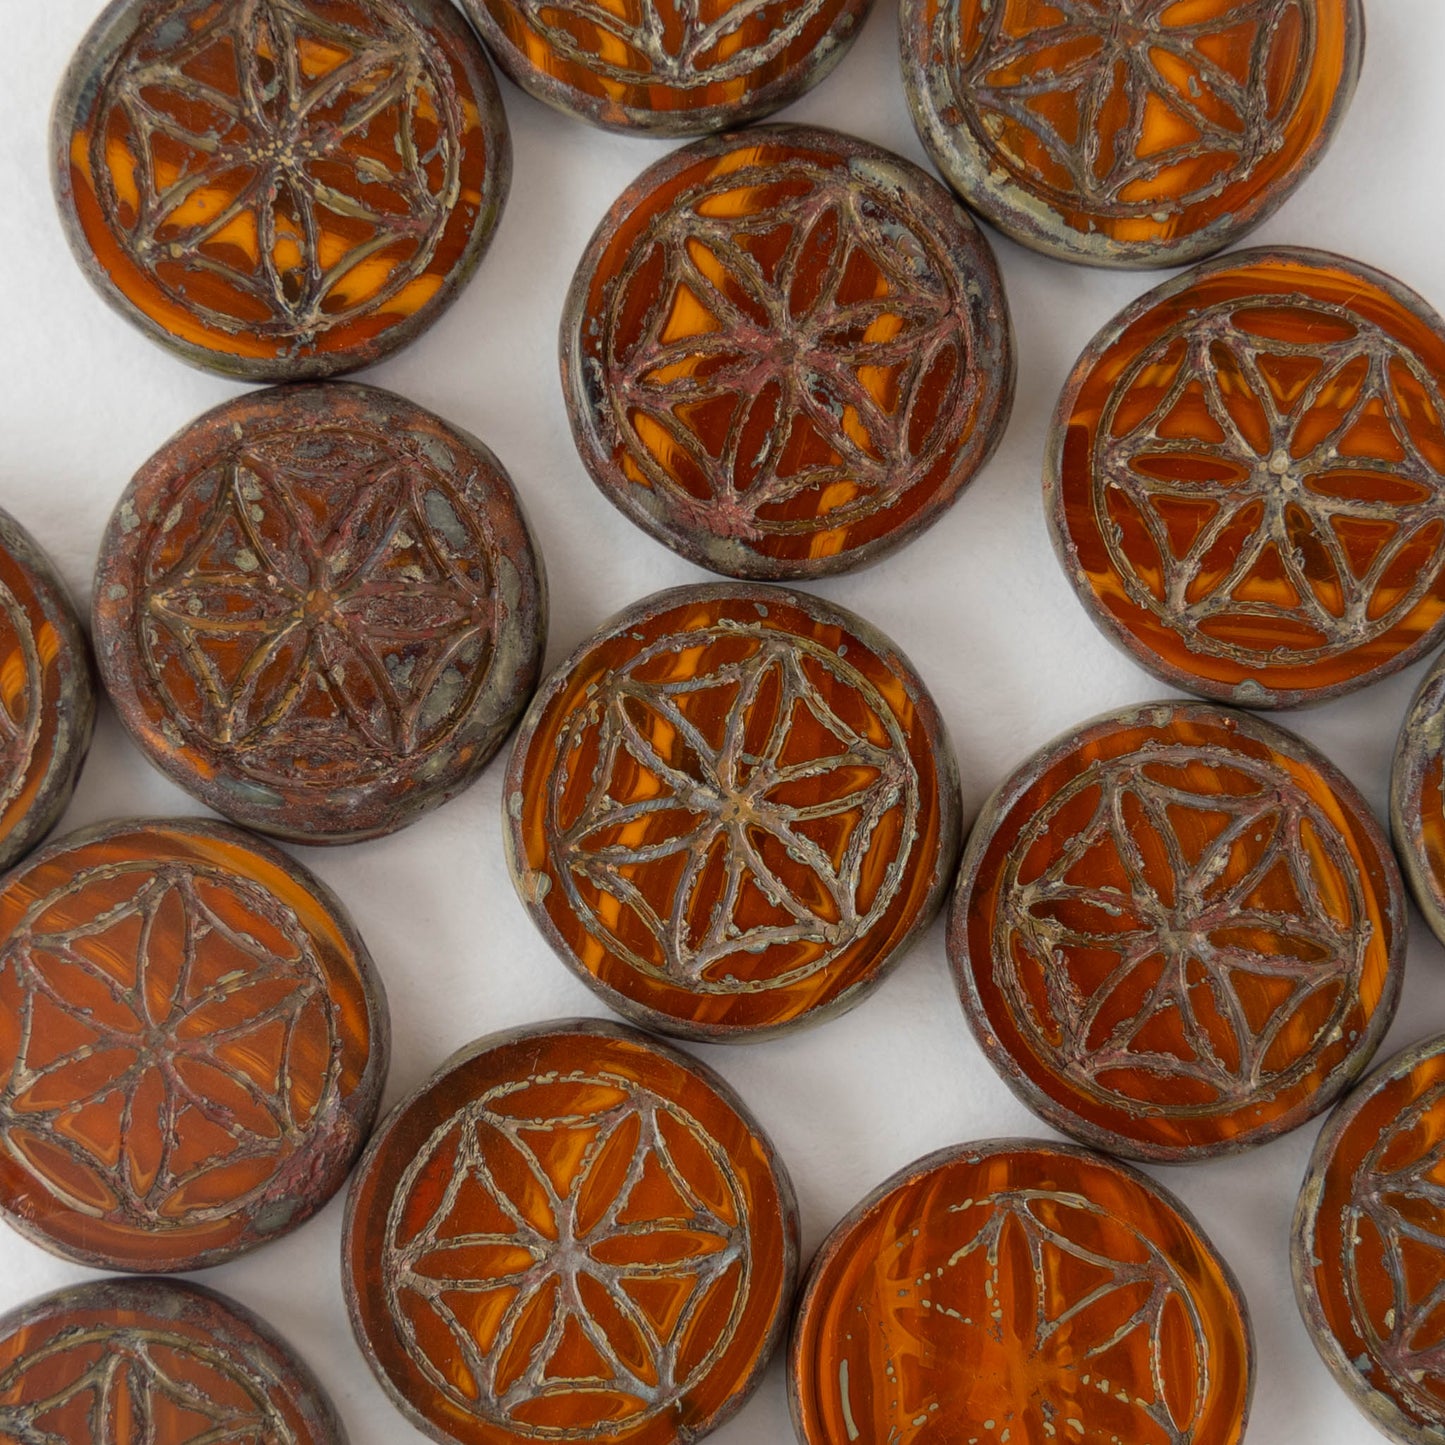 19mm Flower of Life Coin Bead - Red Orange - Choose Amount